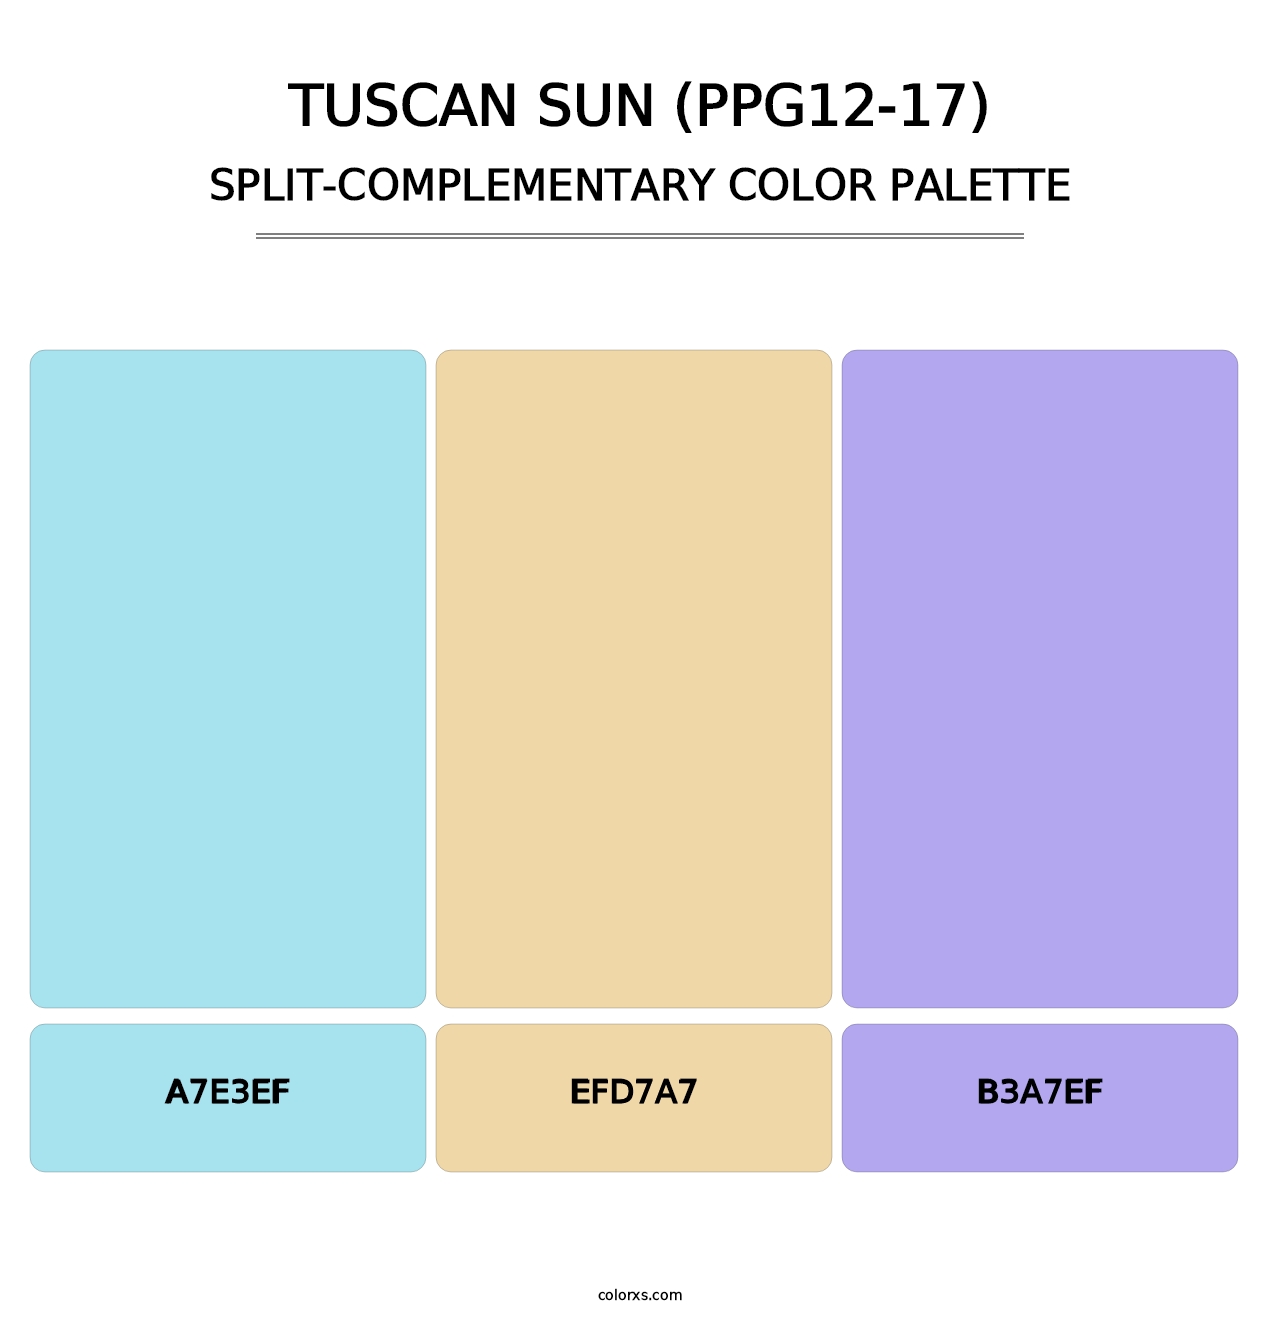 Tuscan Sun (PPG12-17) - Split-Complementary Color Palette